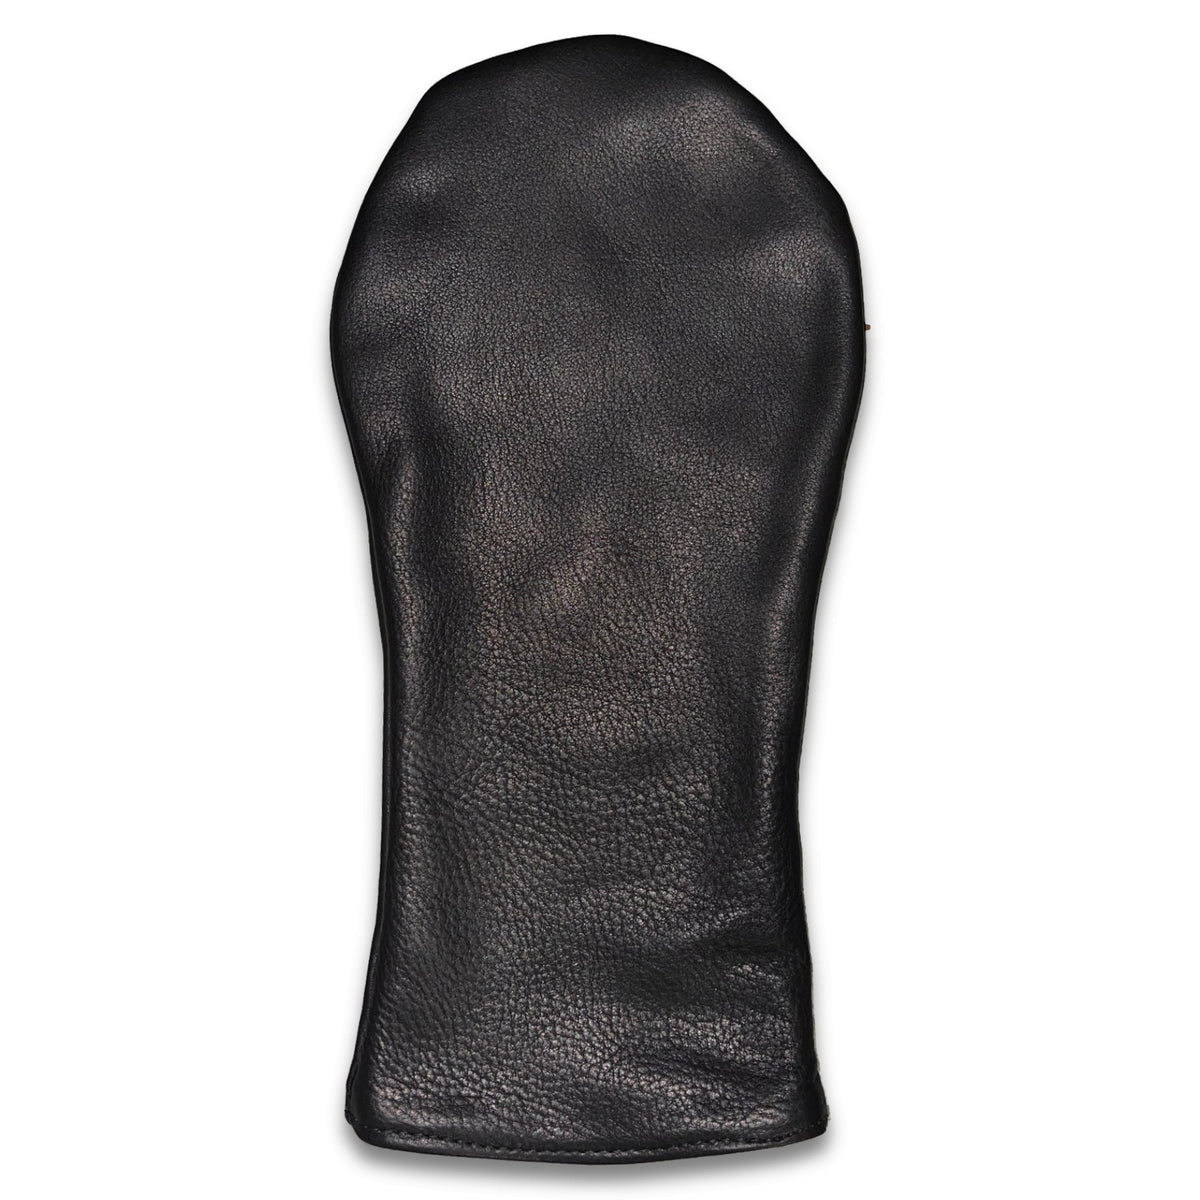 Ranger Leather Head Cover - Black - Driver -